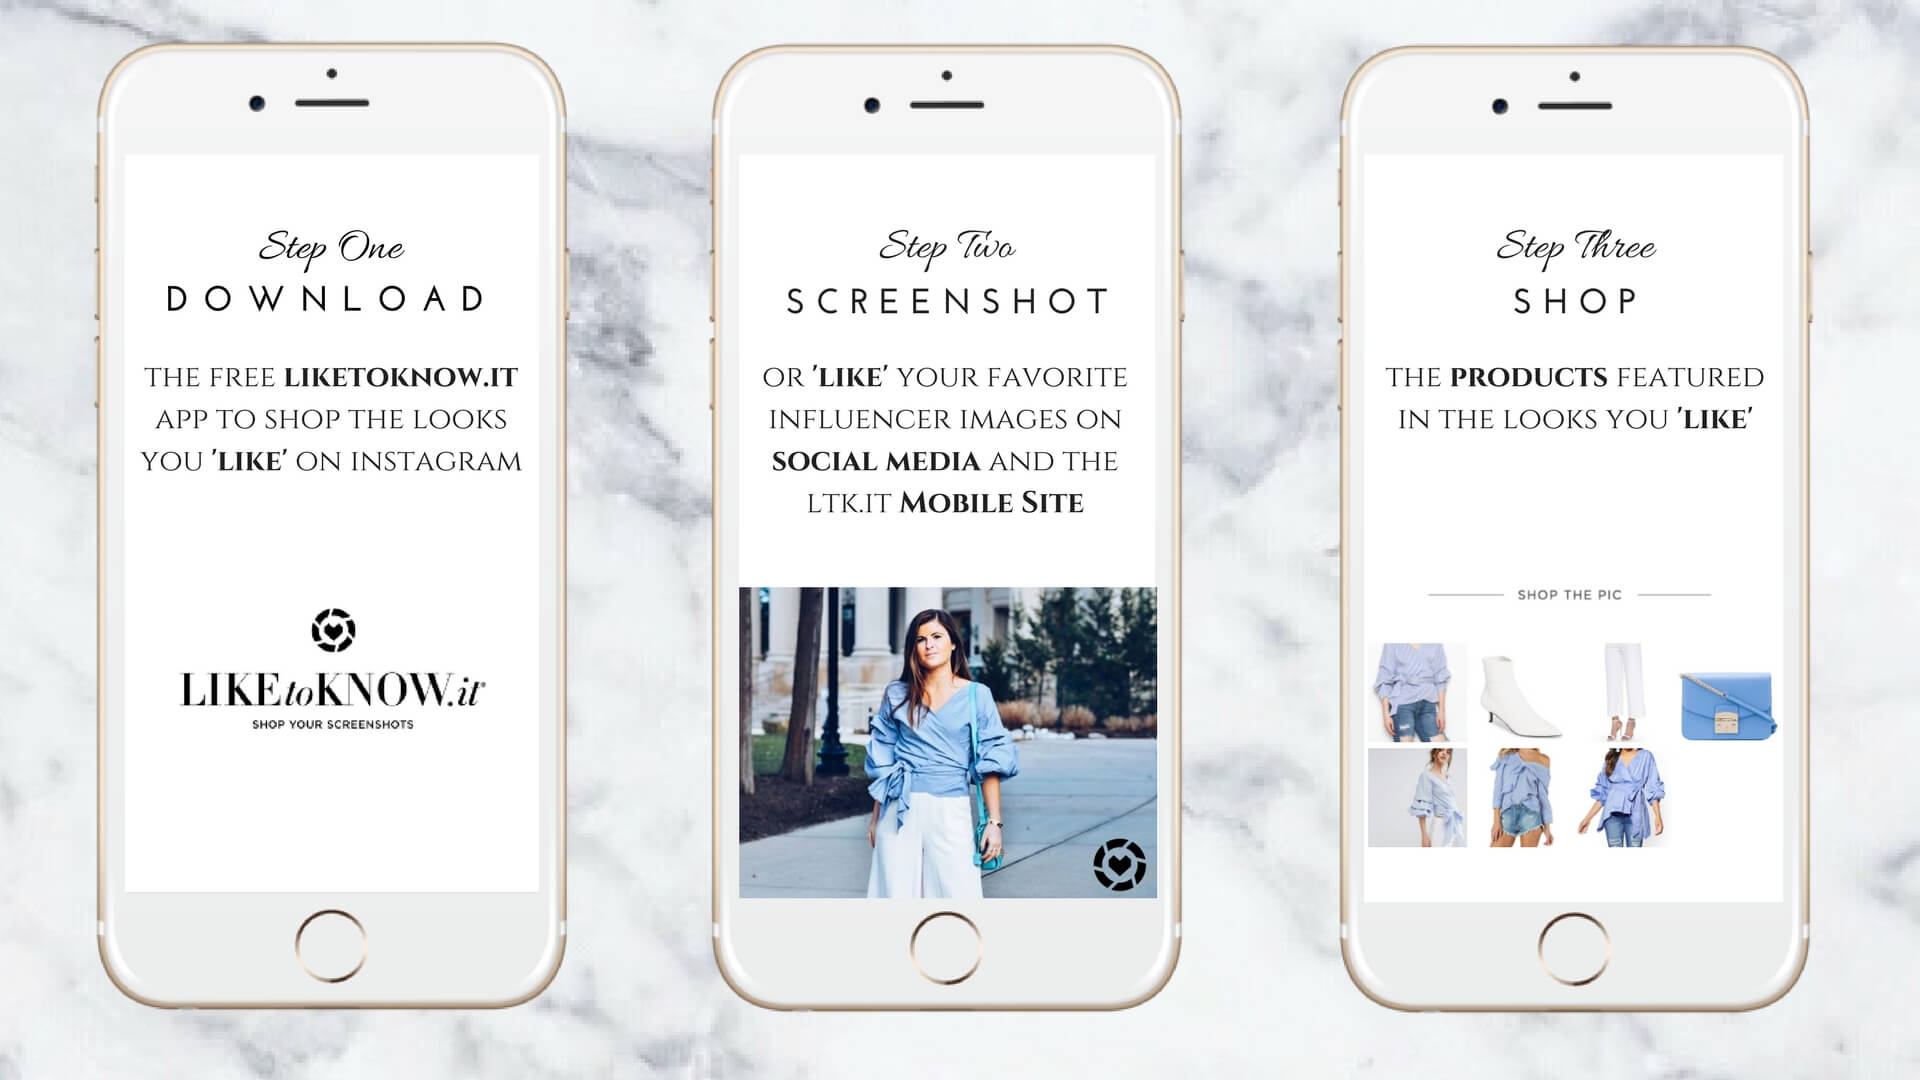 Fashion and Beauty Apps for Android and iPhone Users - Learn How to Download and Use